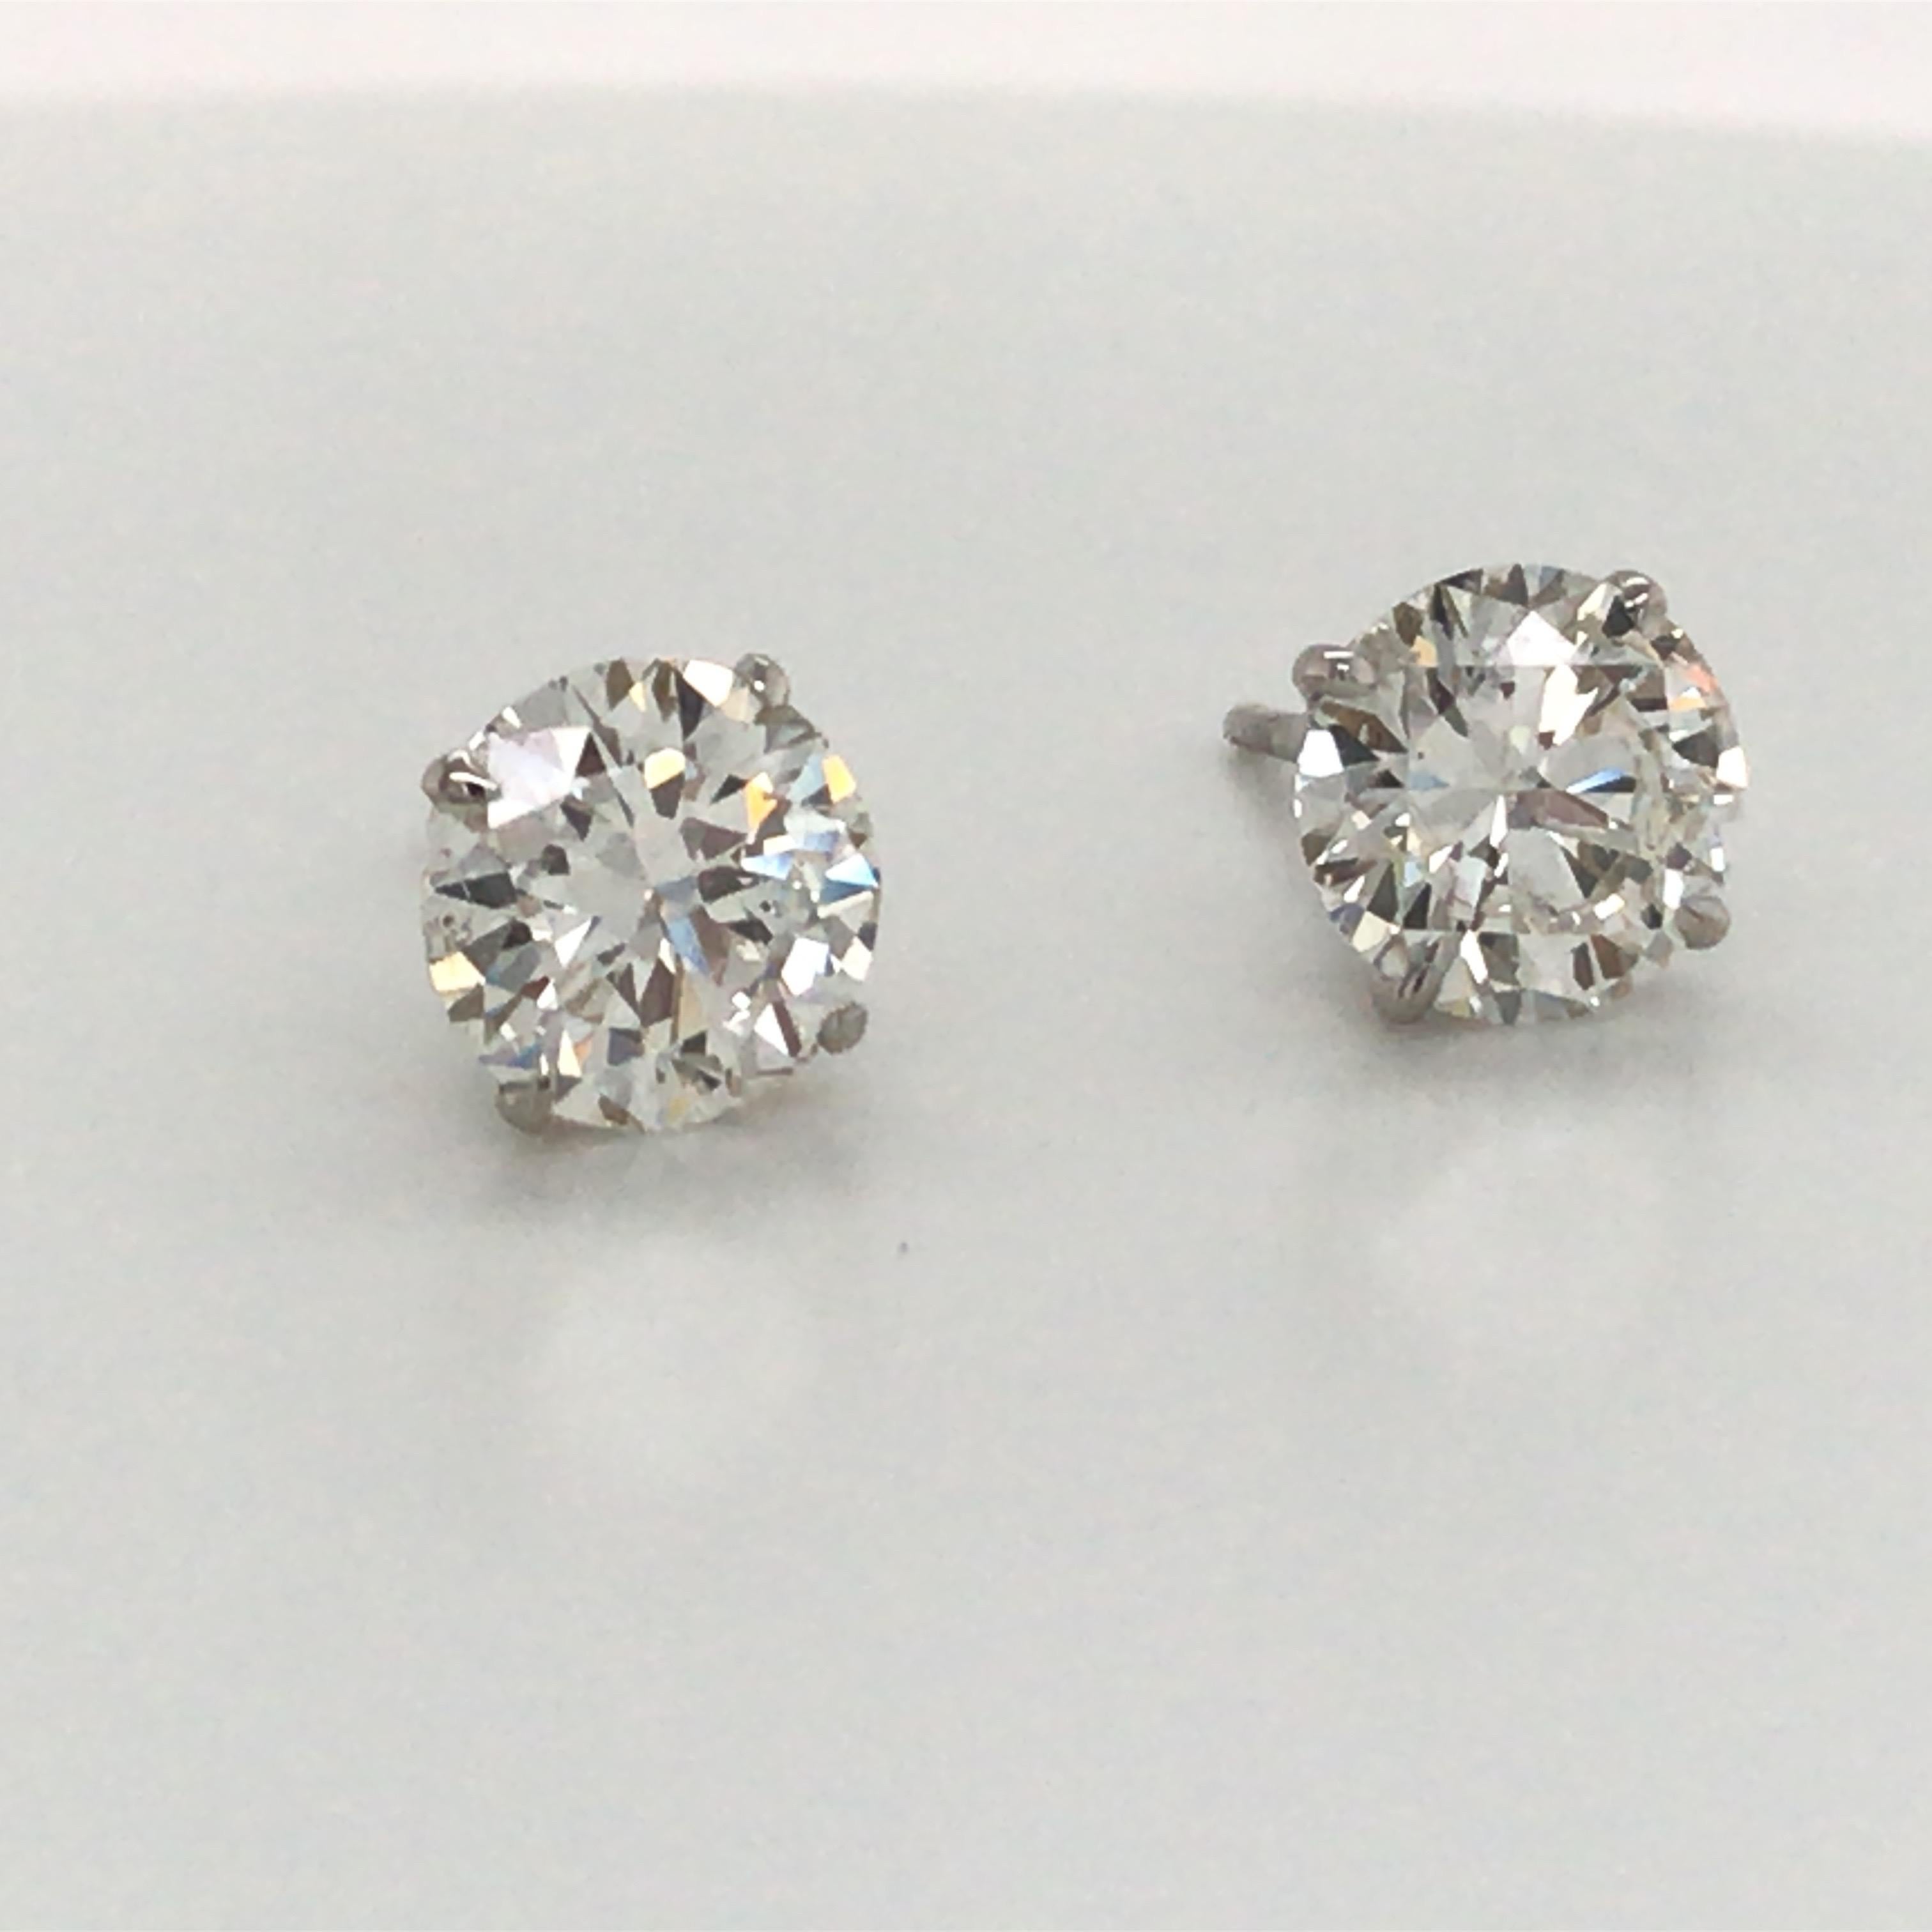 18K White Gold diamond stud earrings weighing 3.41 carats in a 4 prong champagne setting.
Color H-I
Clarity SI2-I1

Please email for additional diamond stud list. 